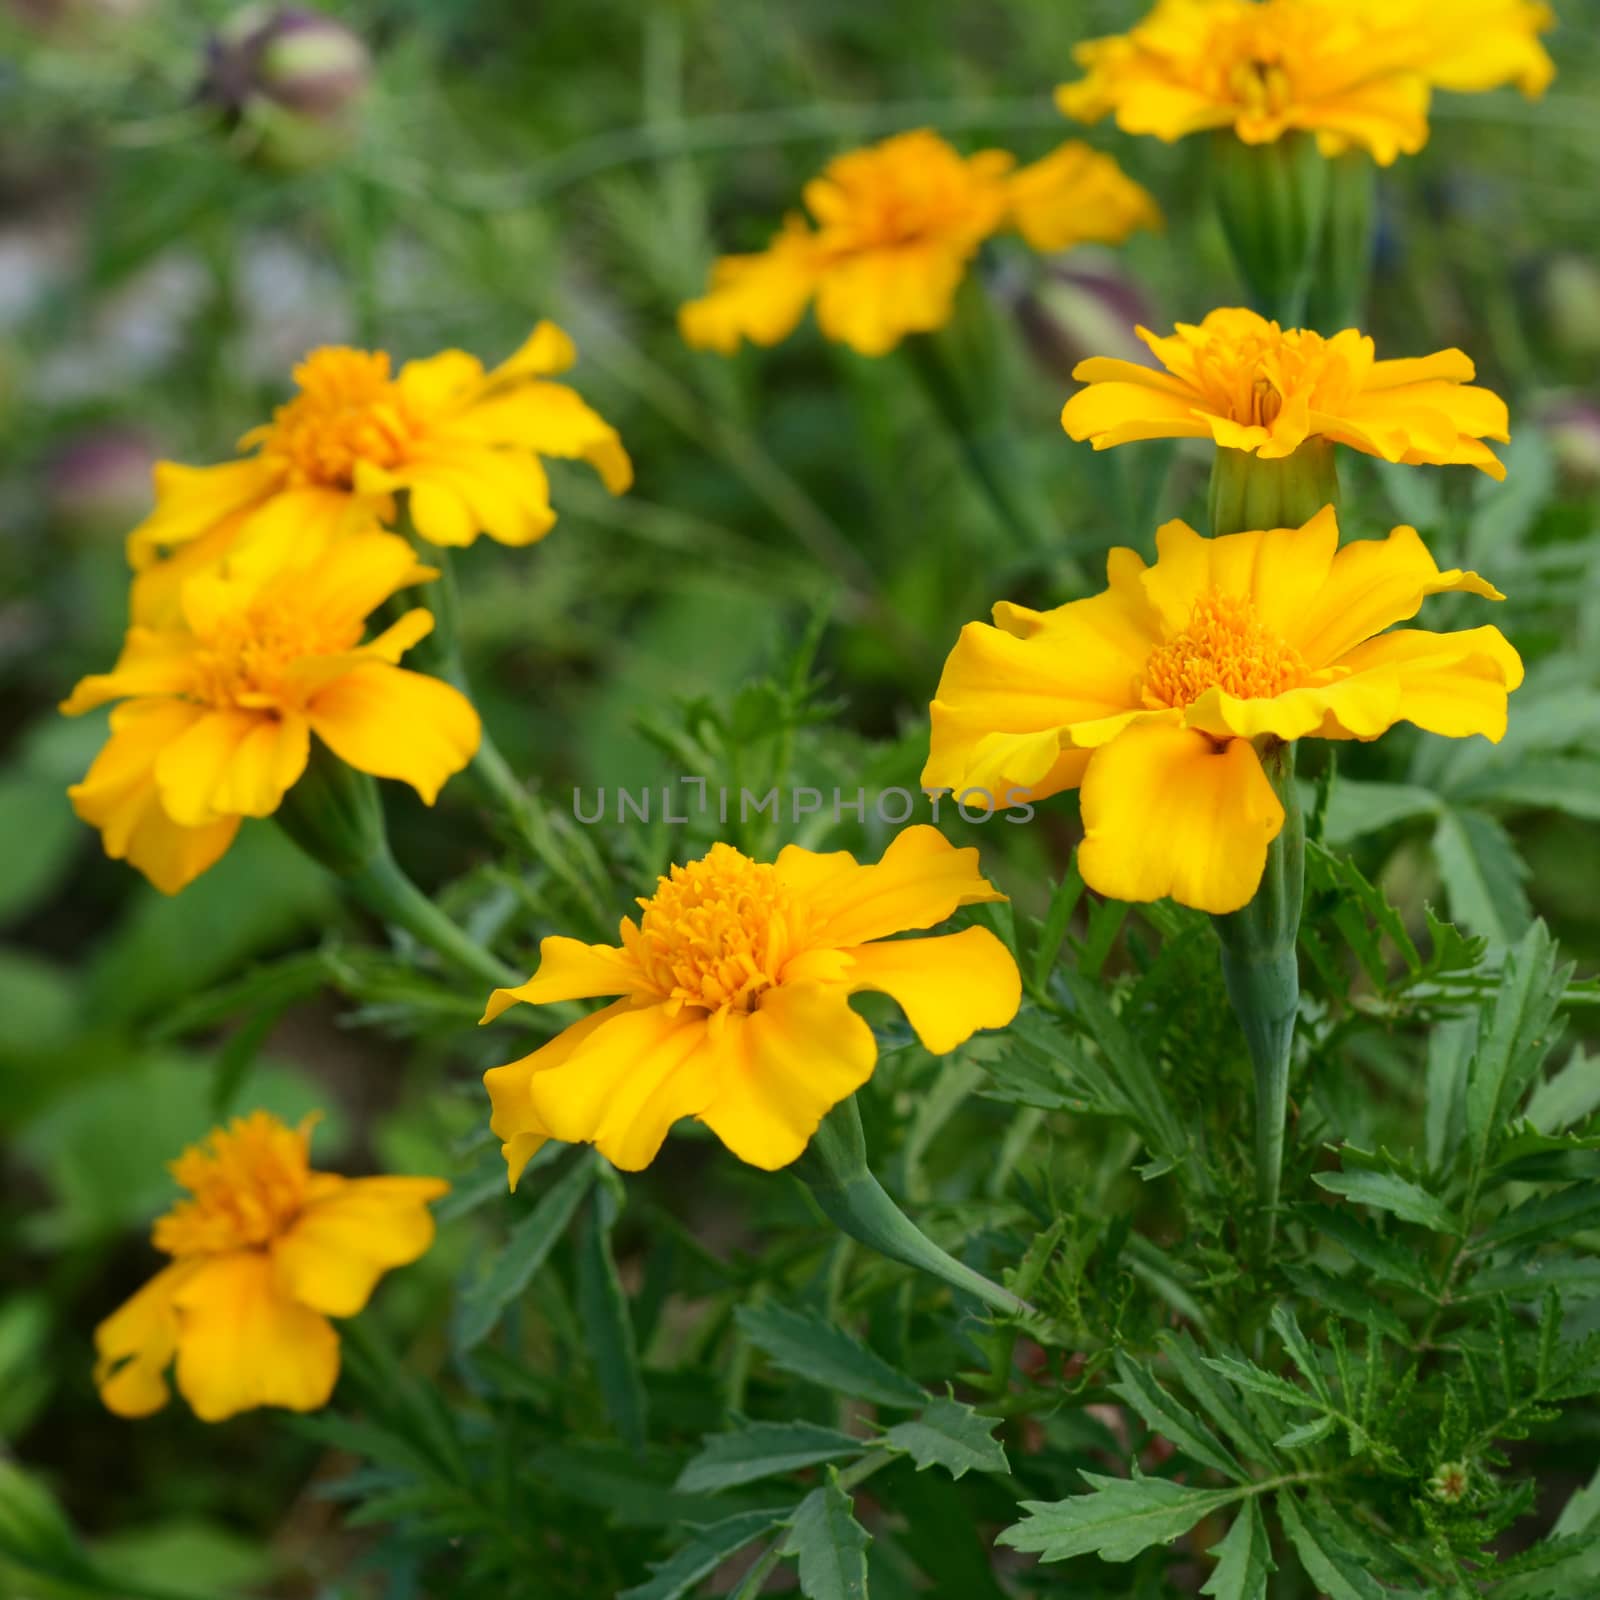 Group of yellow marigold flowers with lush green foliage